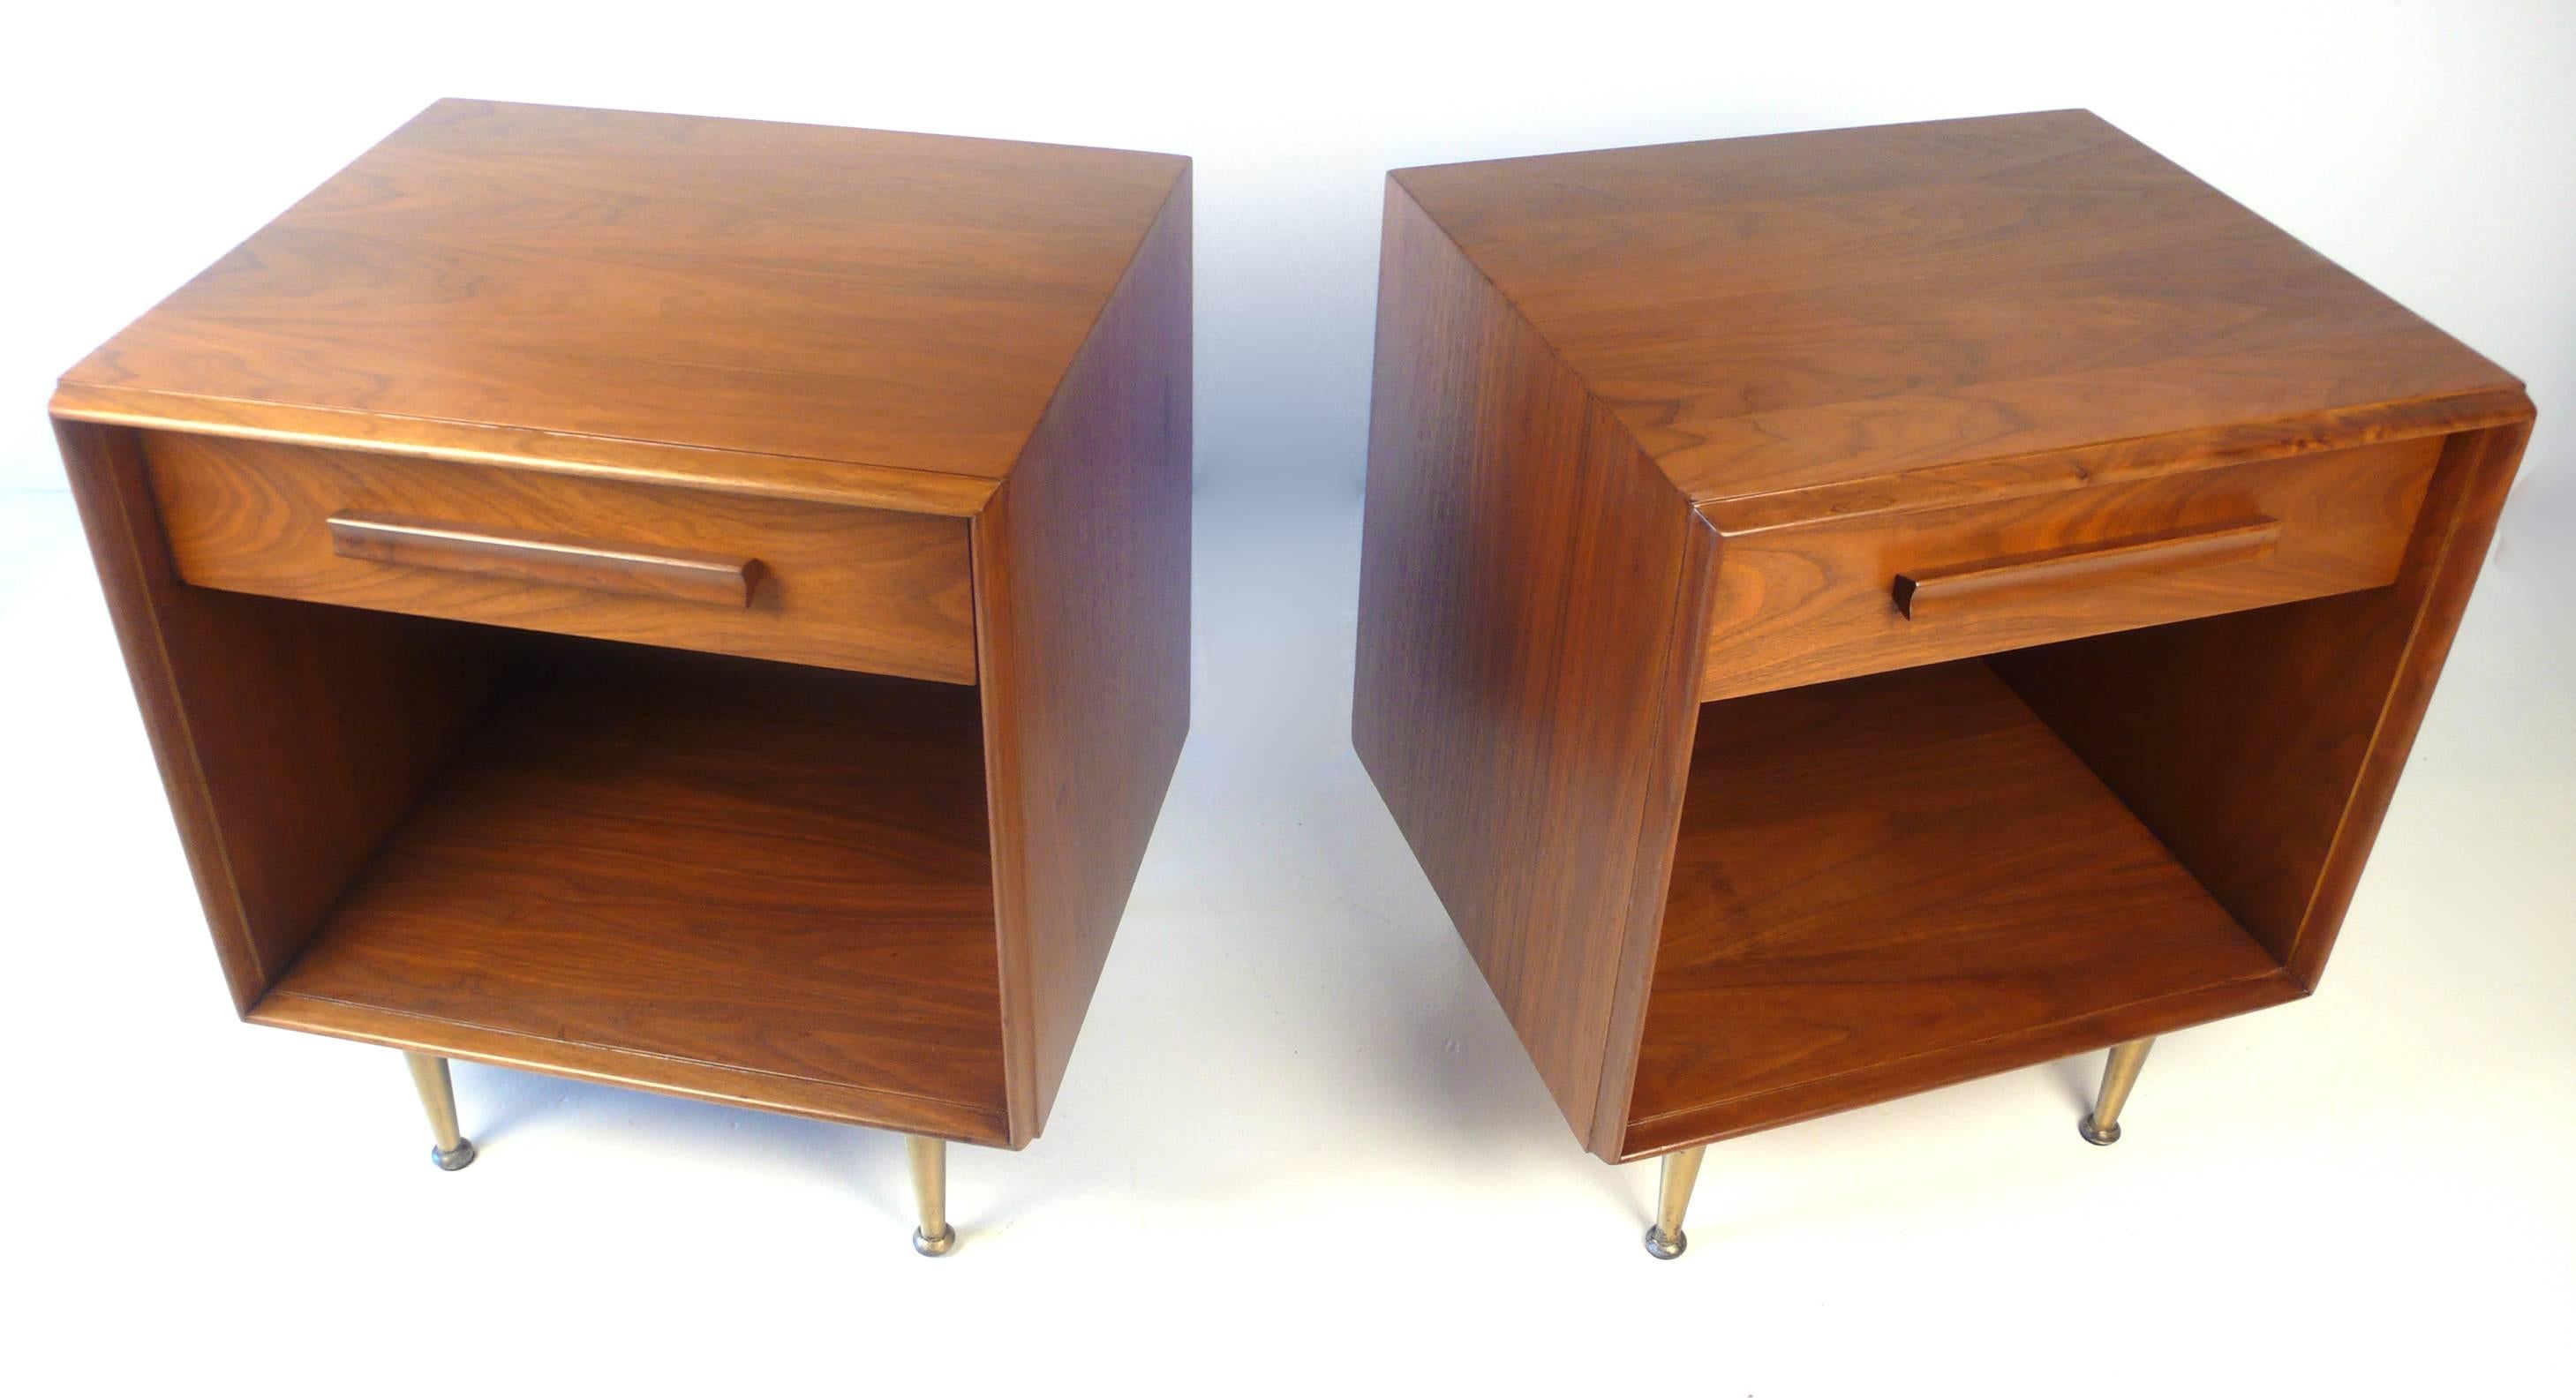 Widdicomb cabinets in American walnut with brass legs. They would serve well as nightstands or as end tables.